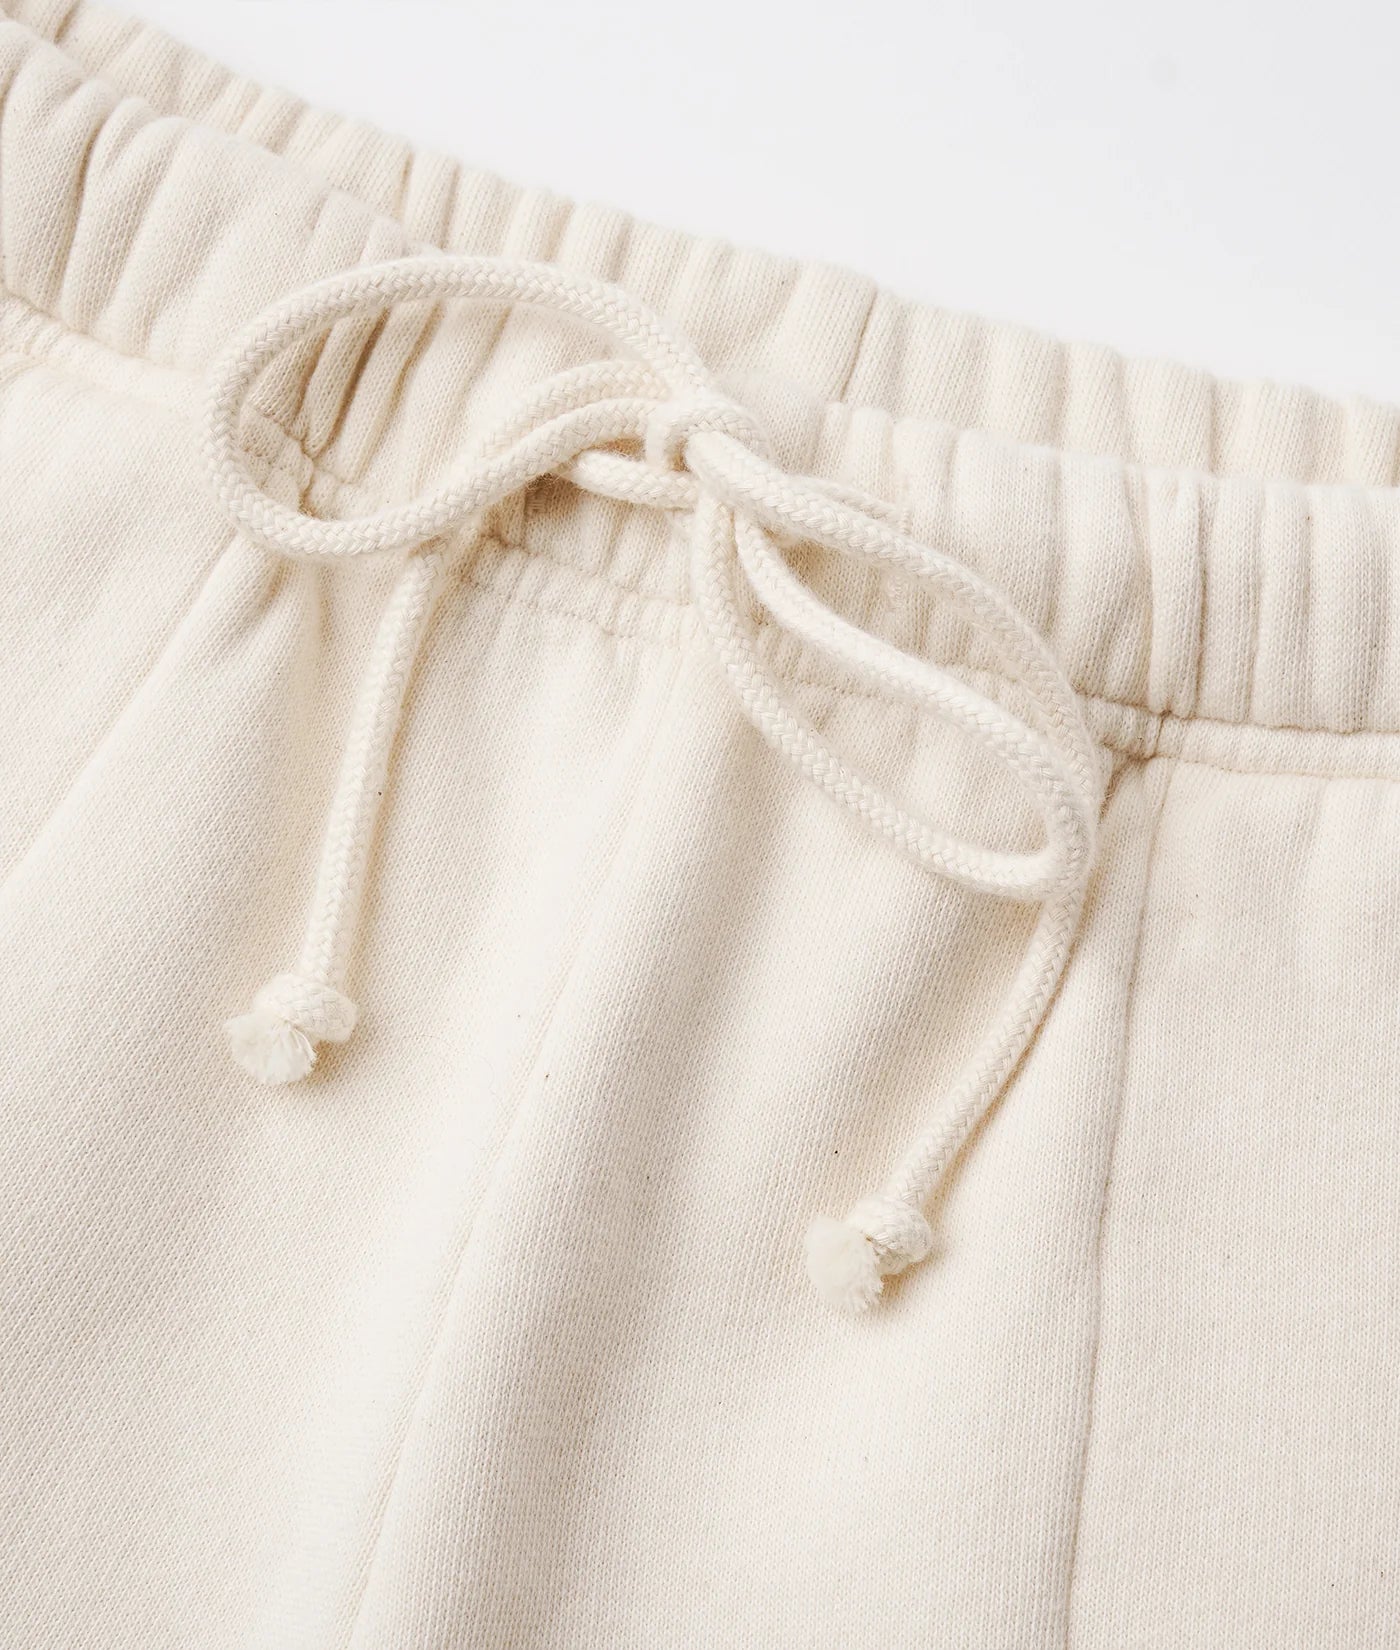 Industry of All Nations Super Sweatshorts, Undyed